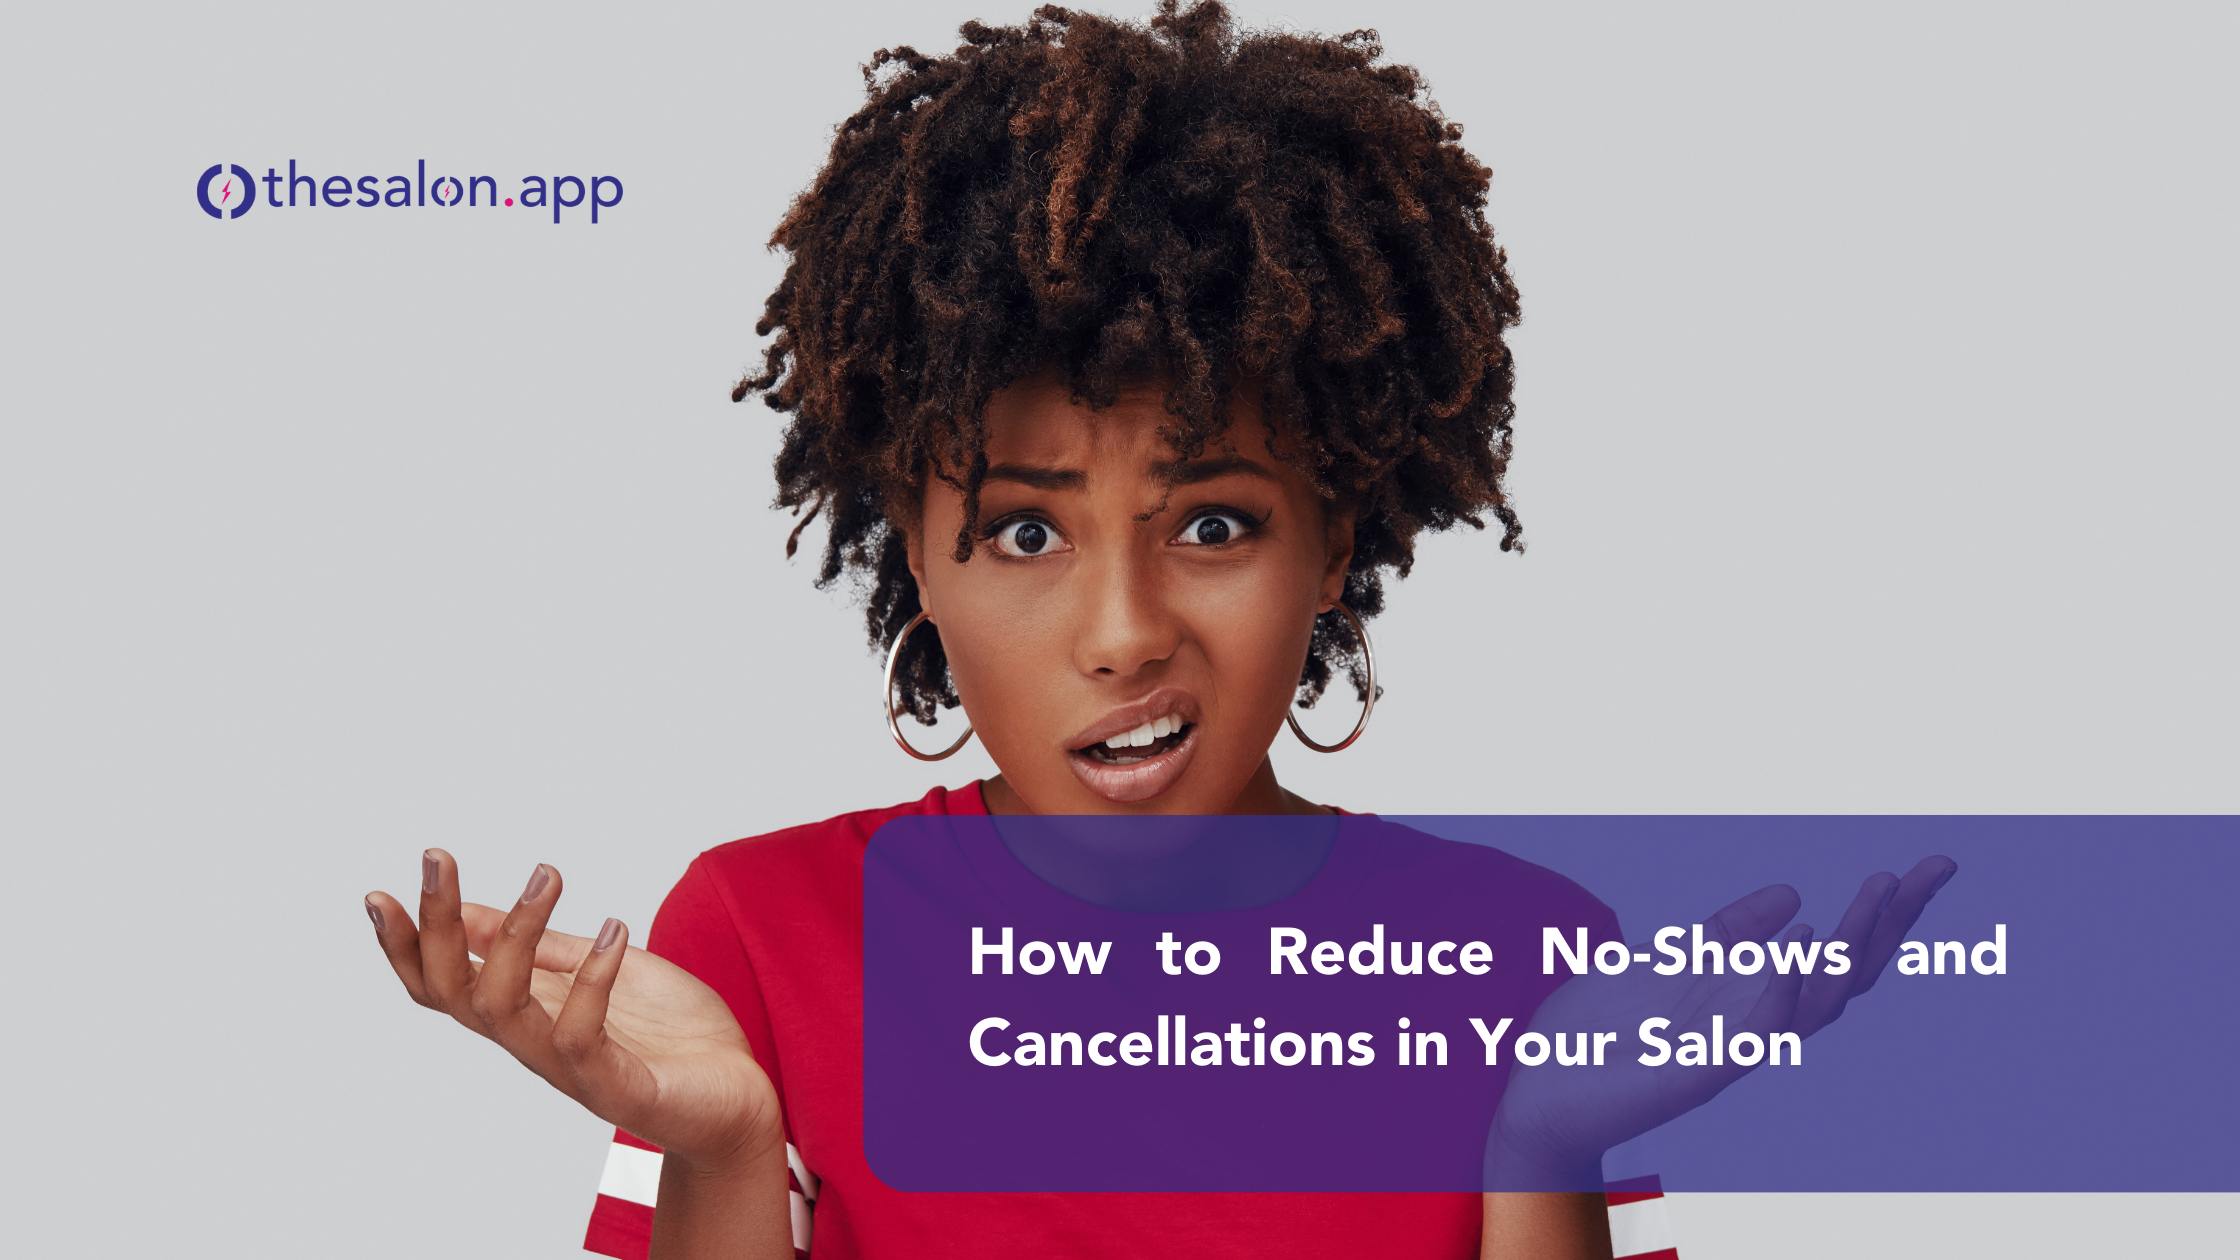 How to reduce no-shows and cancellations in your salon